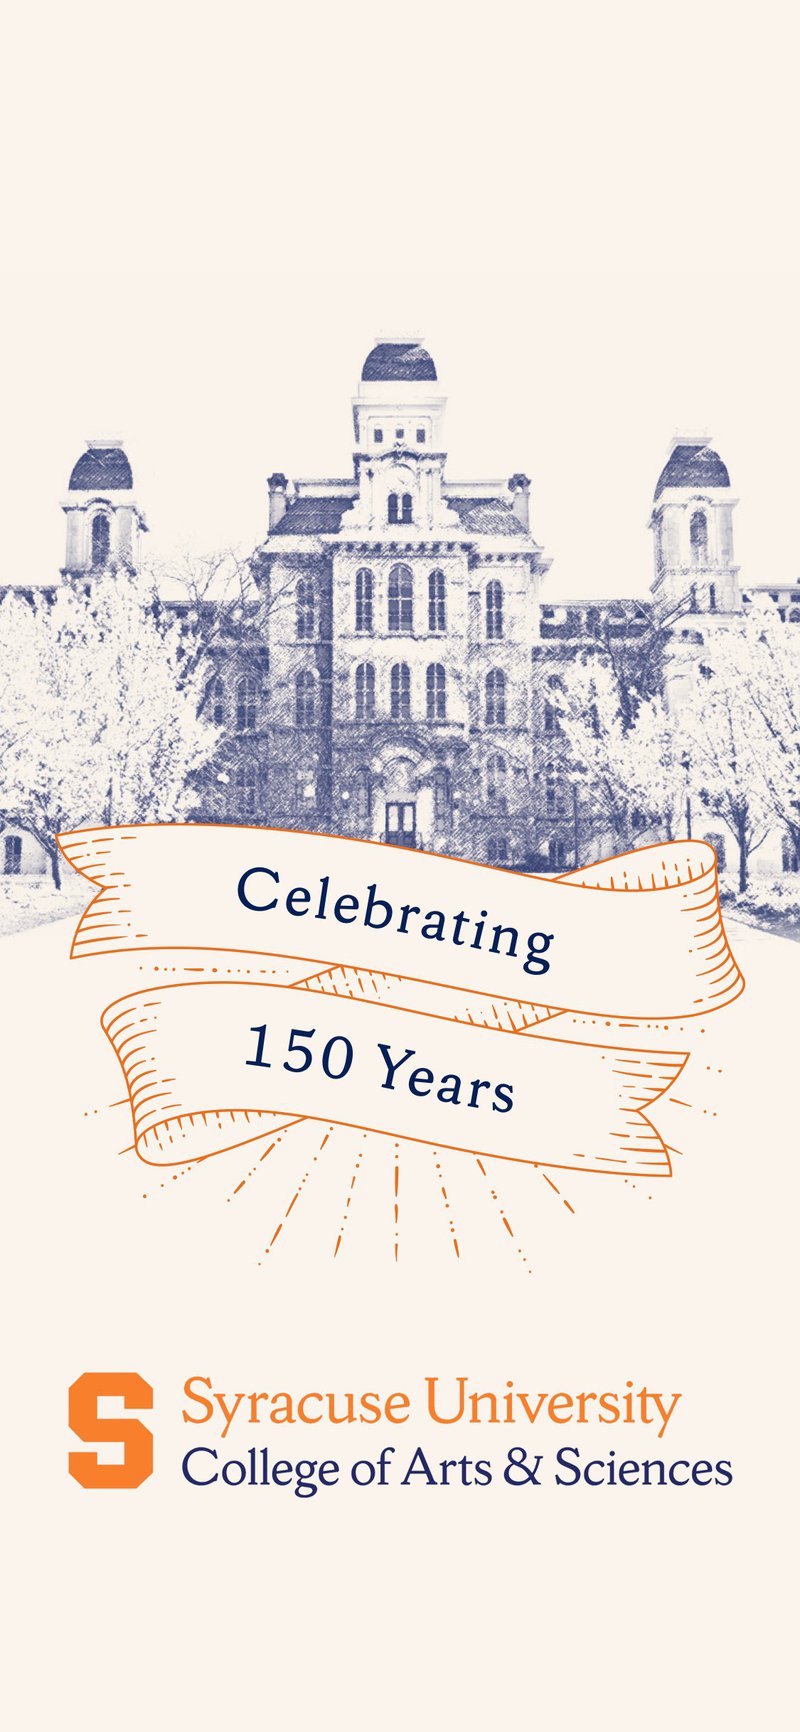 Phone wallpaper shows line sketch of Hall of Languages behind a banner that reads Celebrating 150 Years.